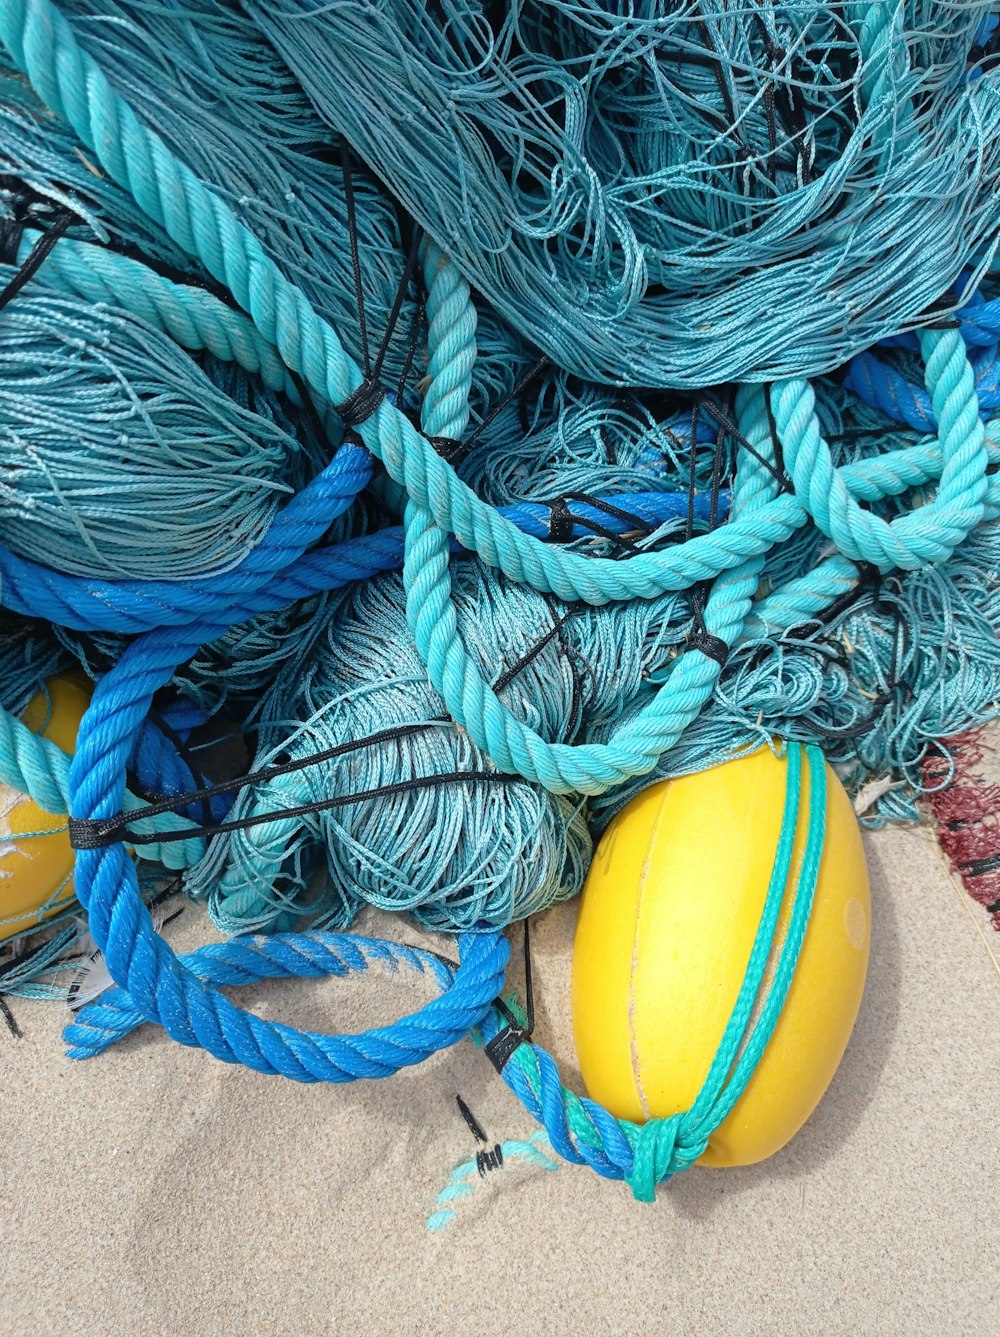 yellow blue and red ball on blue and white rope